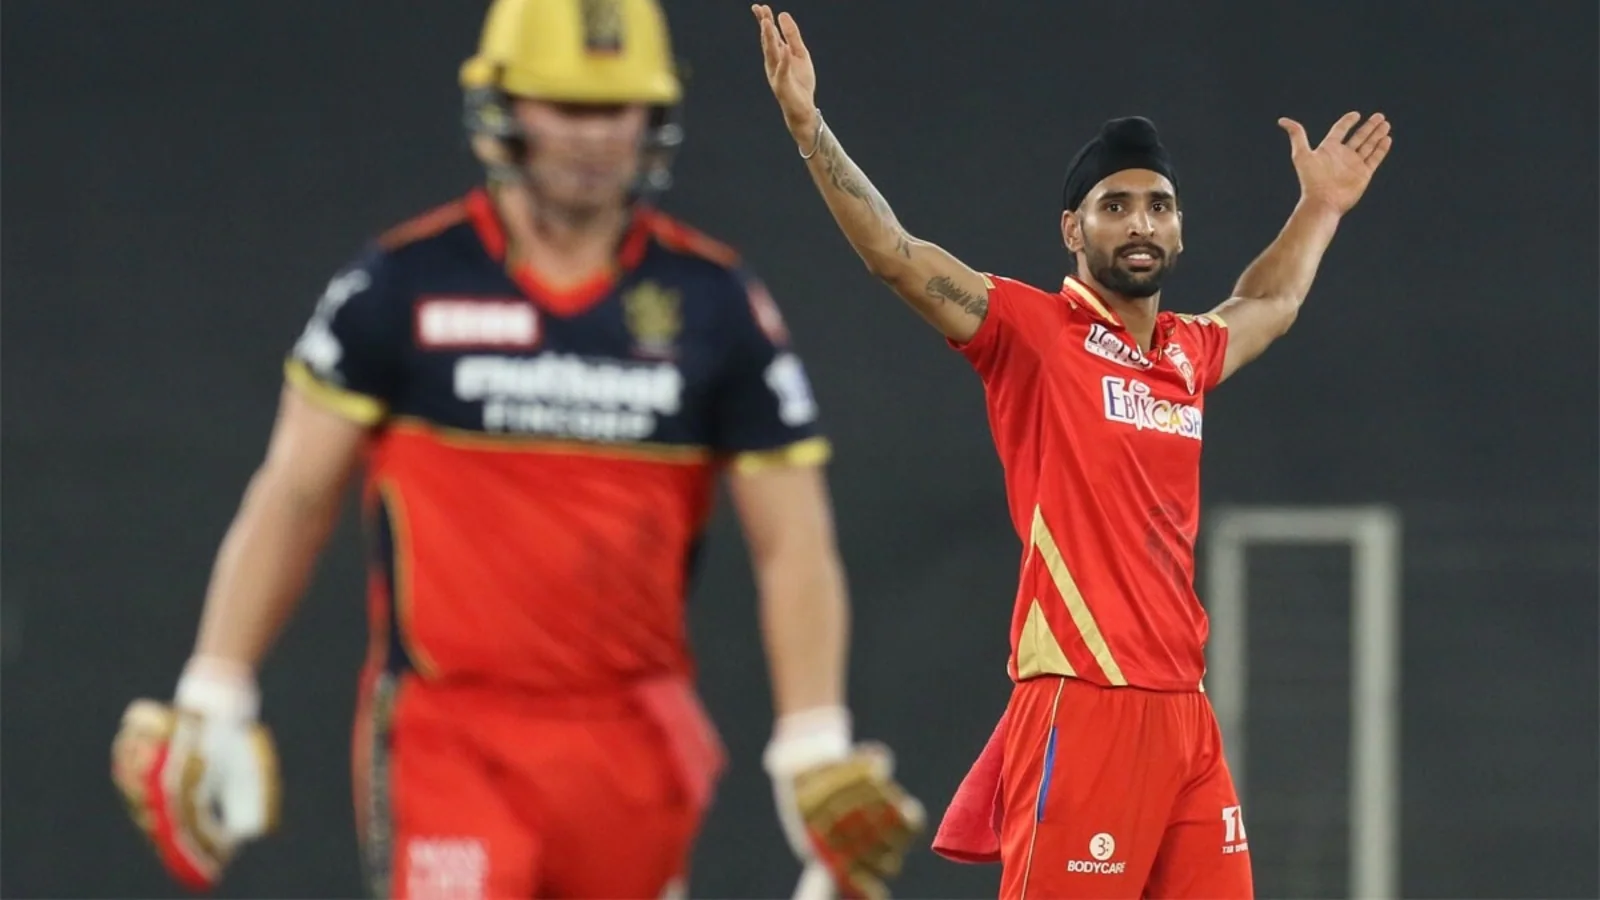 RCB go off course to end in a tumble